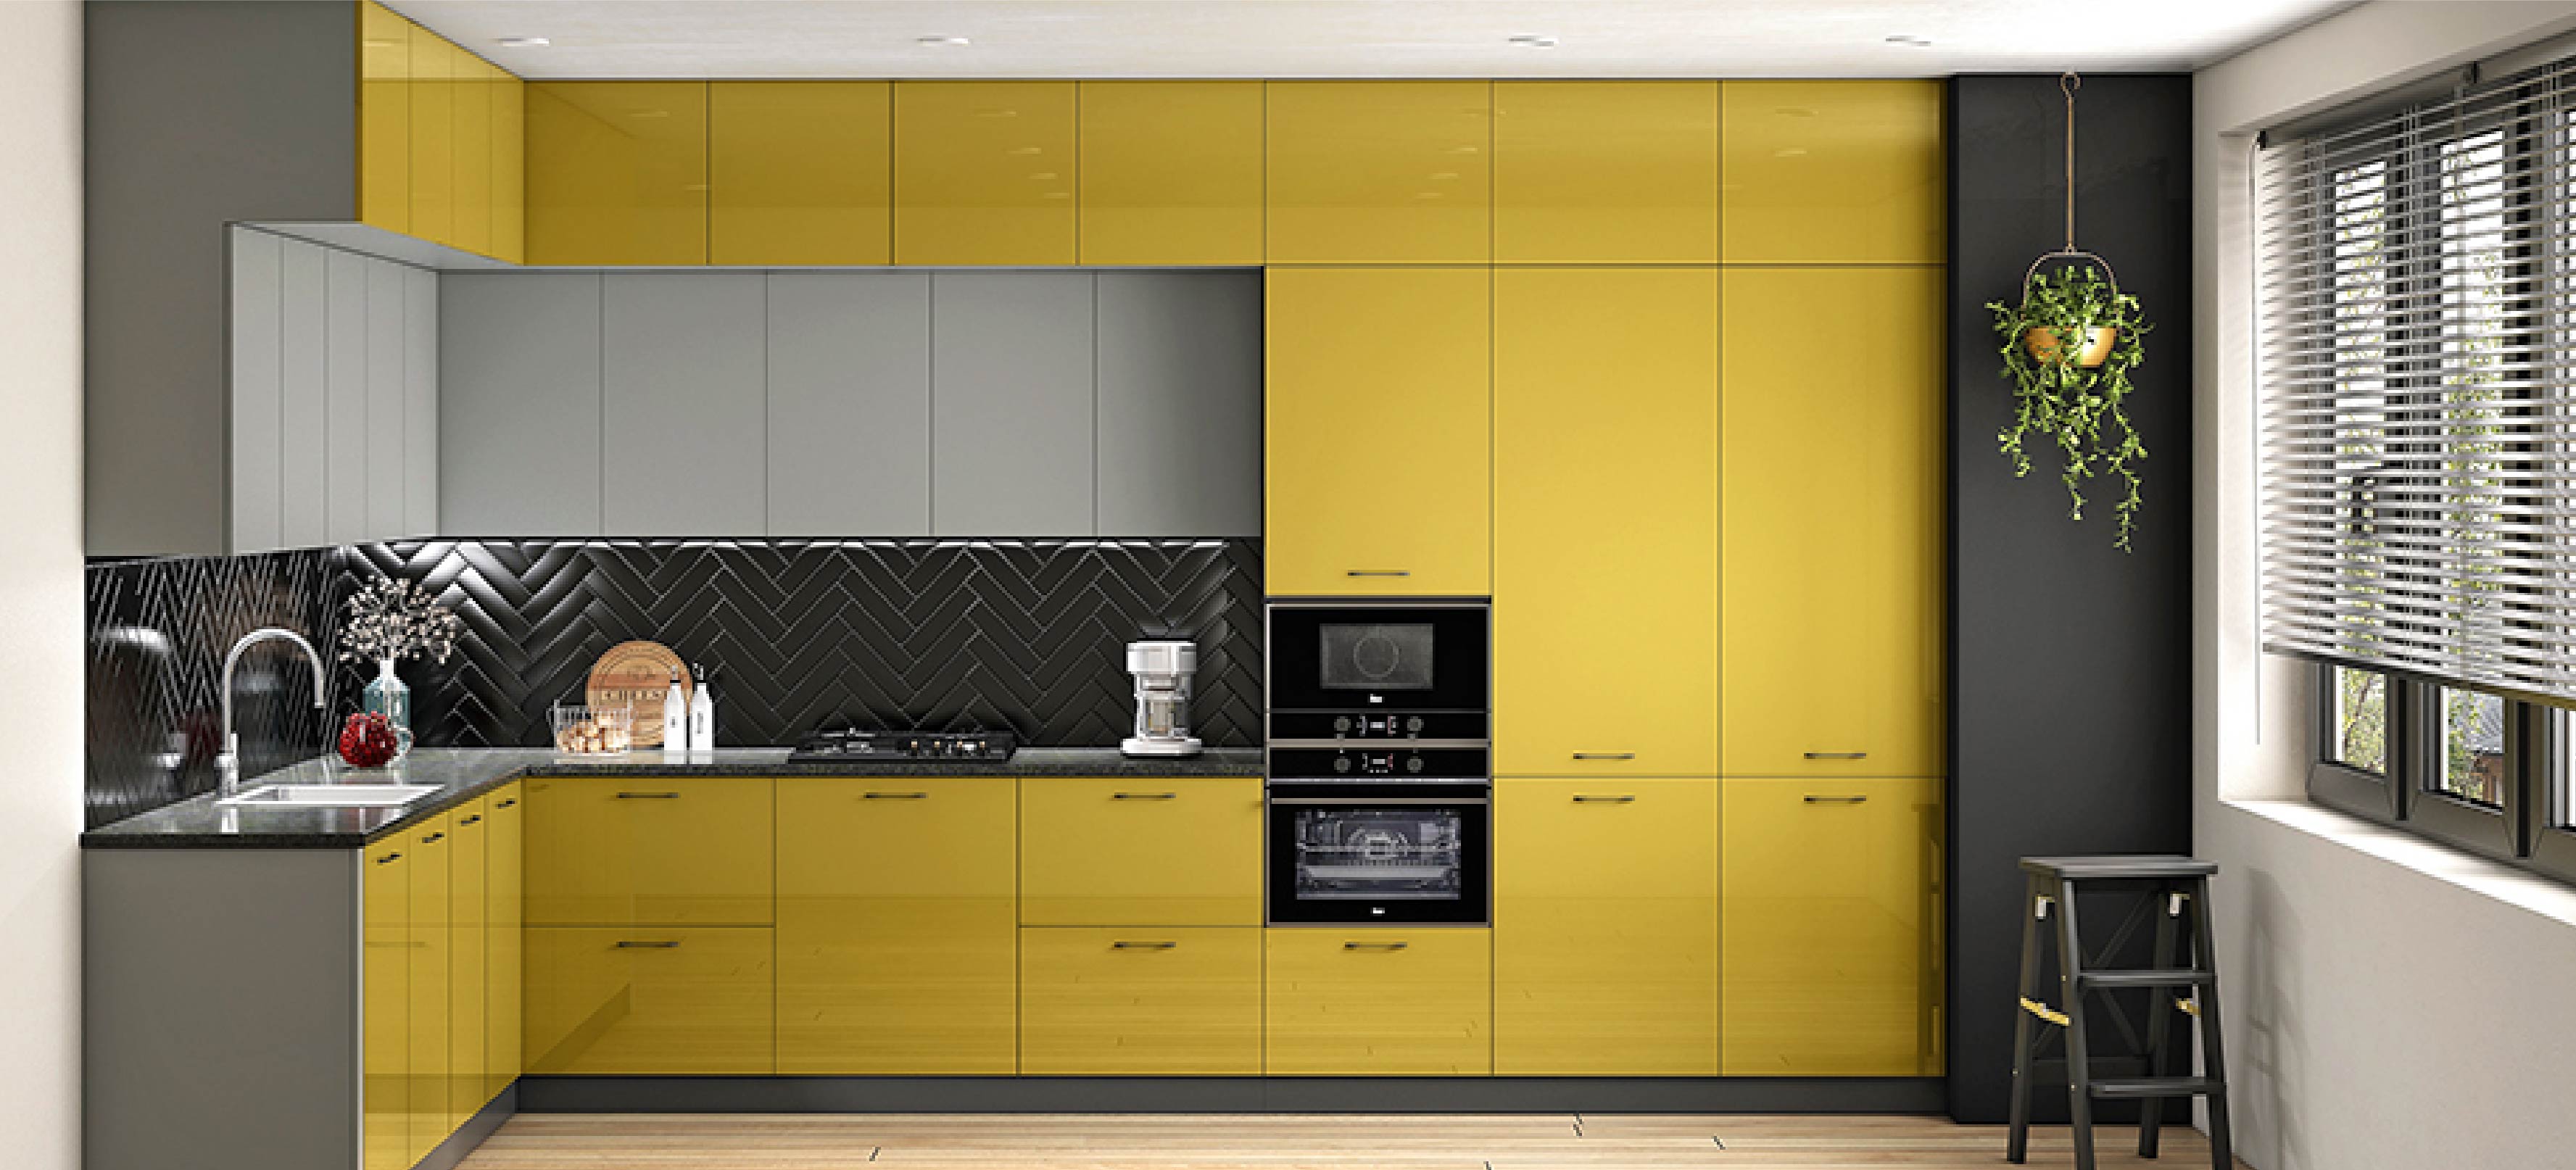 A Complete Guide: The Benefits of L-Shaped Modular Kitchens - Urban Ladder